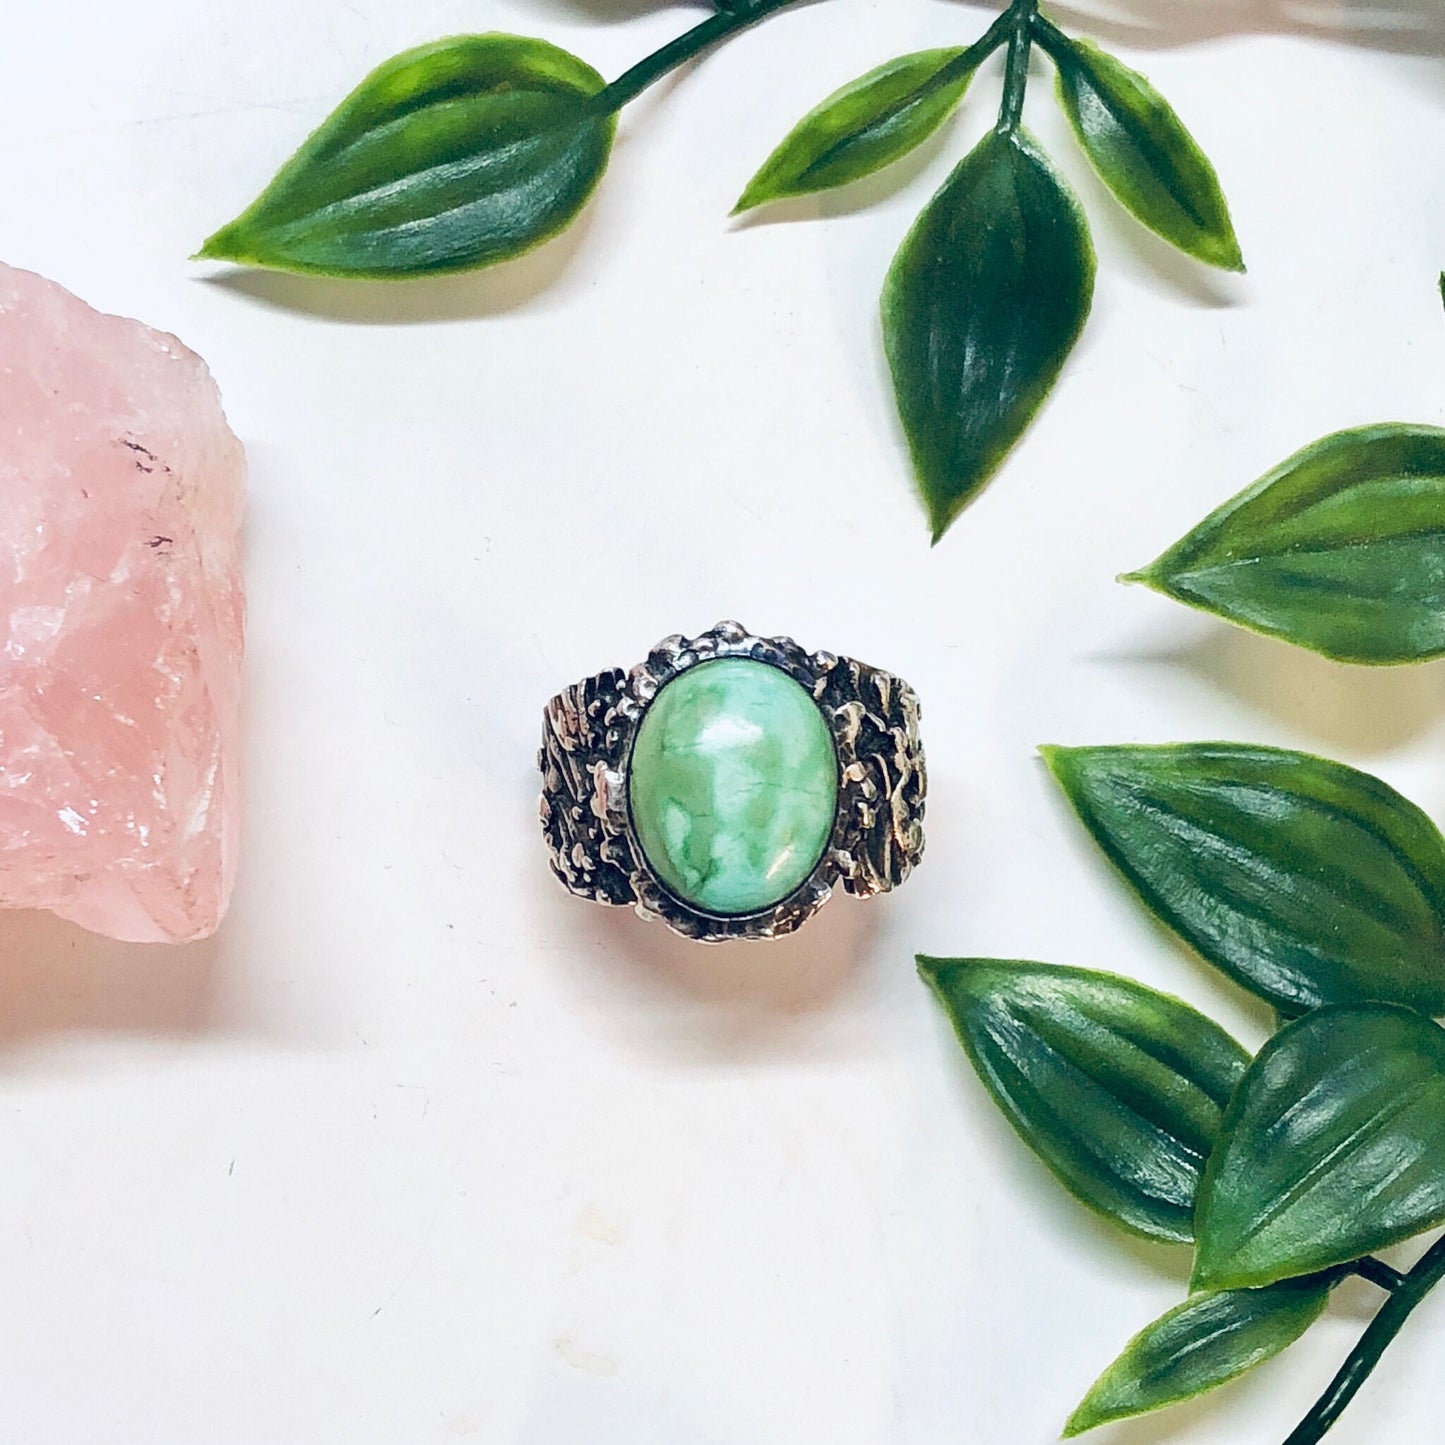 Vintage sterling silver ring with large oval turquoise stone surrounded by textured silver band, alongside rose quartz stone and green leaves, on white background